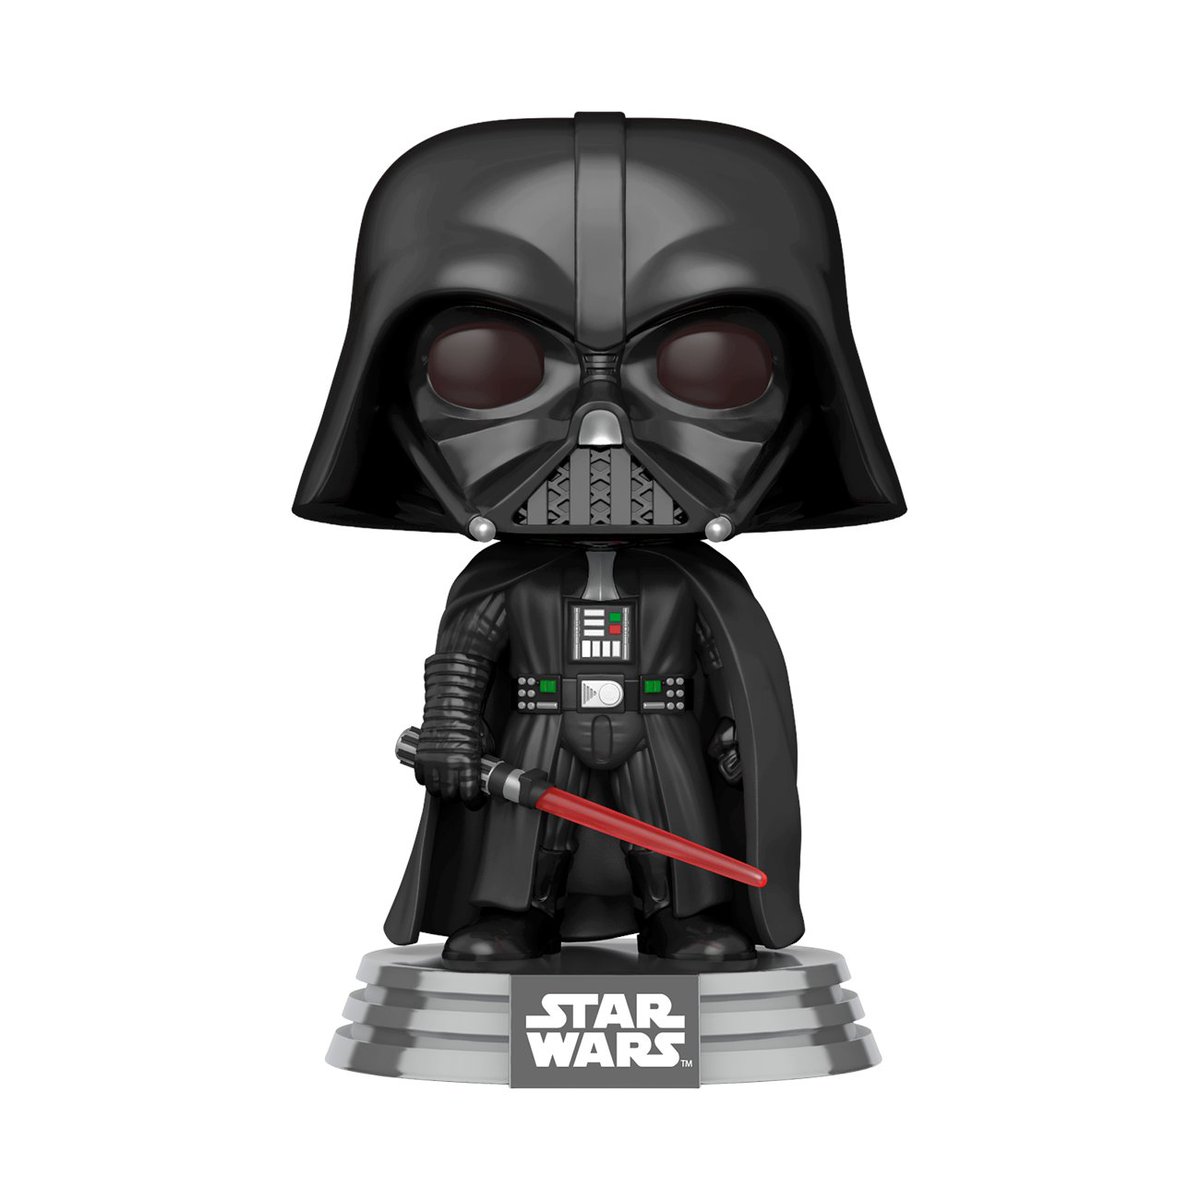 RT and follow @OriginalFunko for the chance to WIN the Star Wars Celebration exclusive STAR WARS™ - Darth Vader™ POP! #Funko #FunkoPop #Giveaway #StarWars #StarWarsCelebration @SW_Celebration